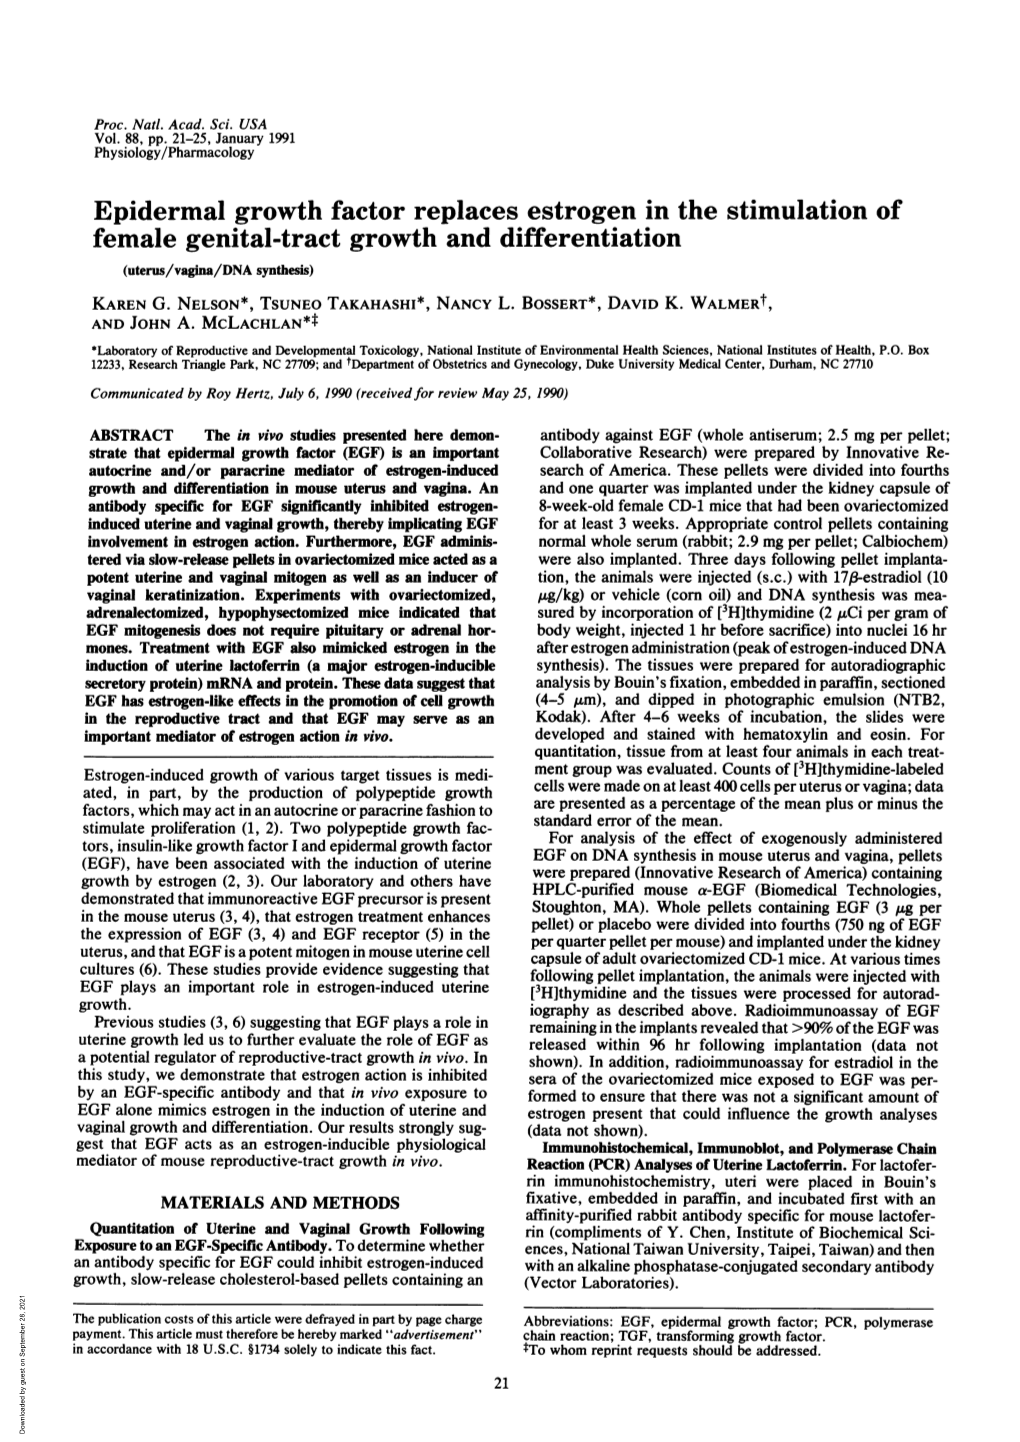 Epidermal Growth Factor Replaces Estrogen in the Stimulation of Female Genital-Tract Growth and Differentiation (Uterus/Vagina/DNA Synthesis) KAREN G